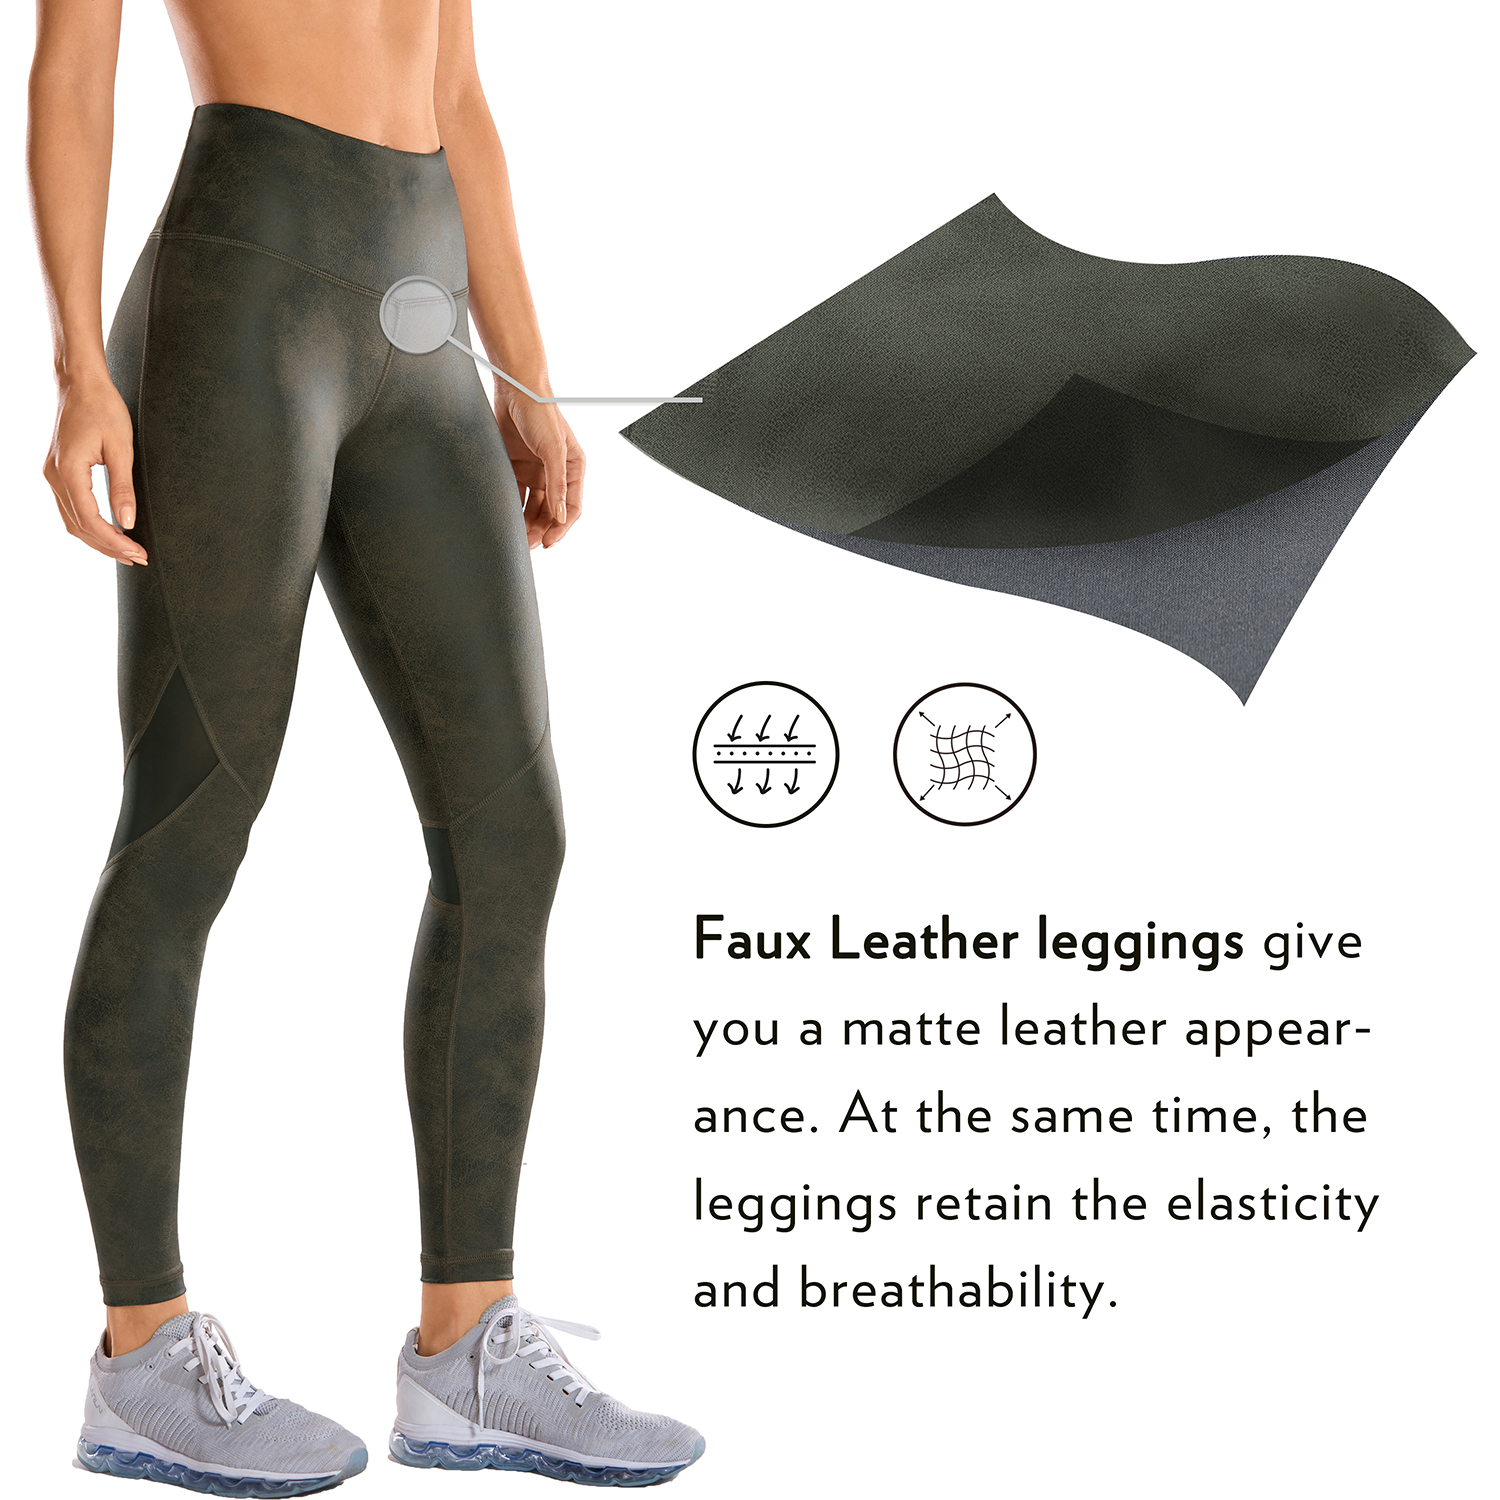  CRZ YOGA Women's Faux Leather Workout Leggings 25 Inches - Mesh Tight  Yoga Athletic Pants with Drawcord Matte Coated Ocean Bue Plain XX-Small :  Clothing, Shoes & Jewelry